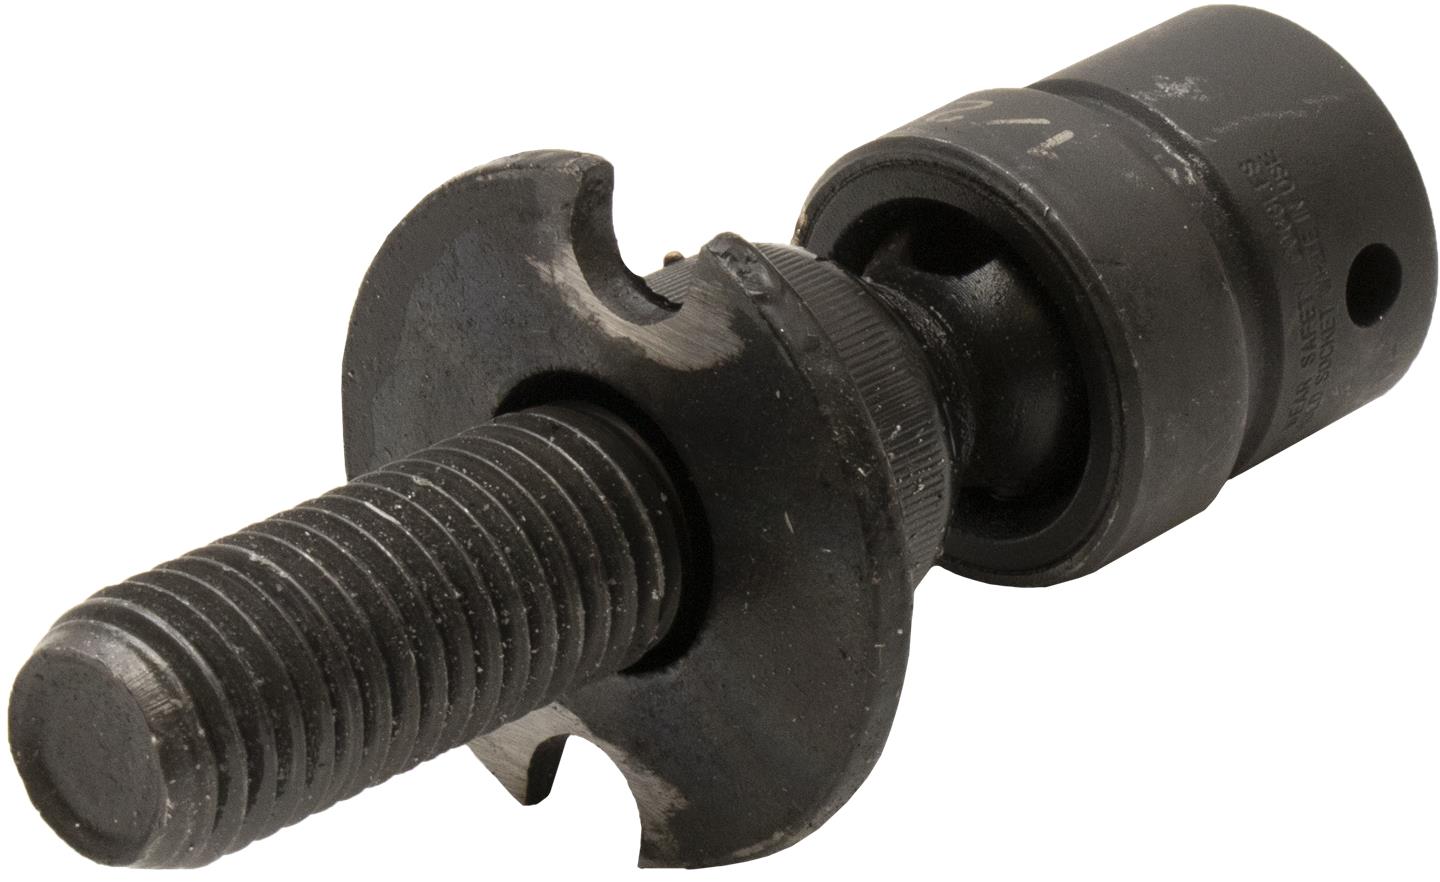 Marshalltown 28745 Spin Screed Live End Replacement Universal Joint